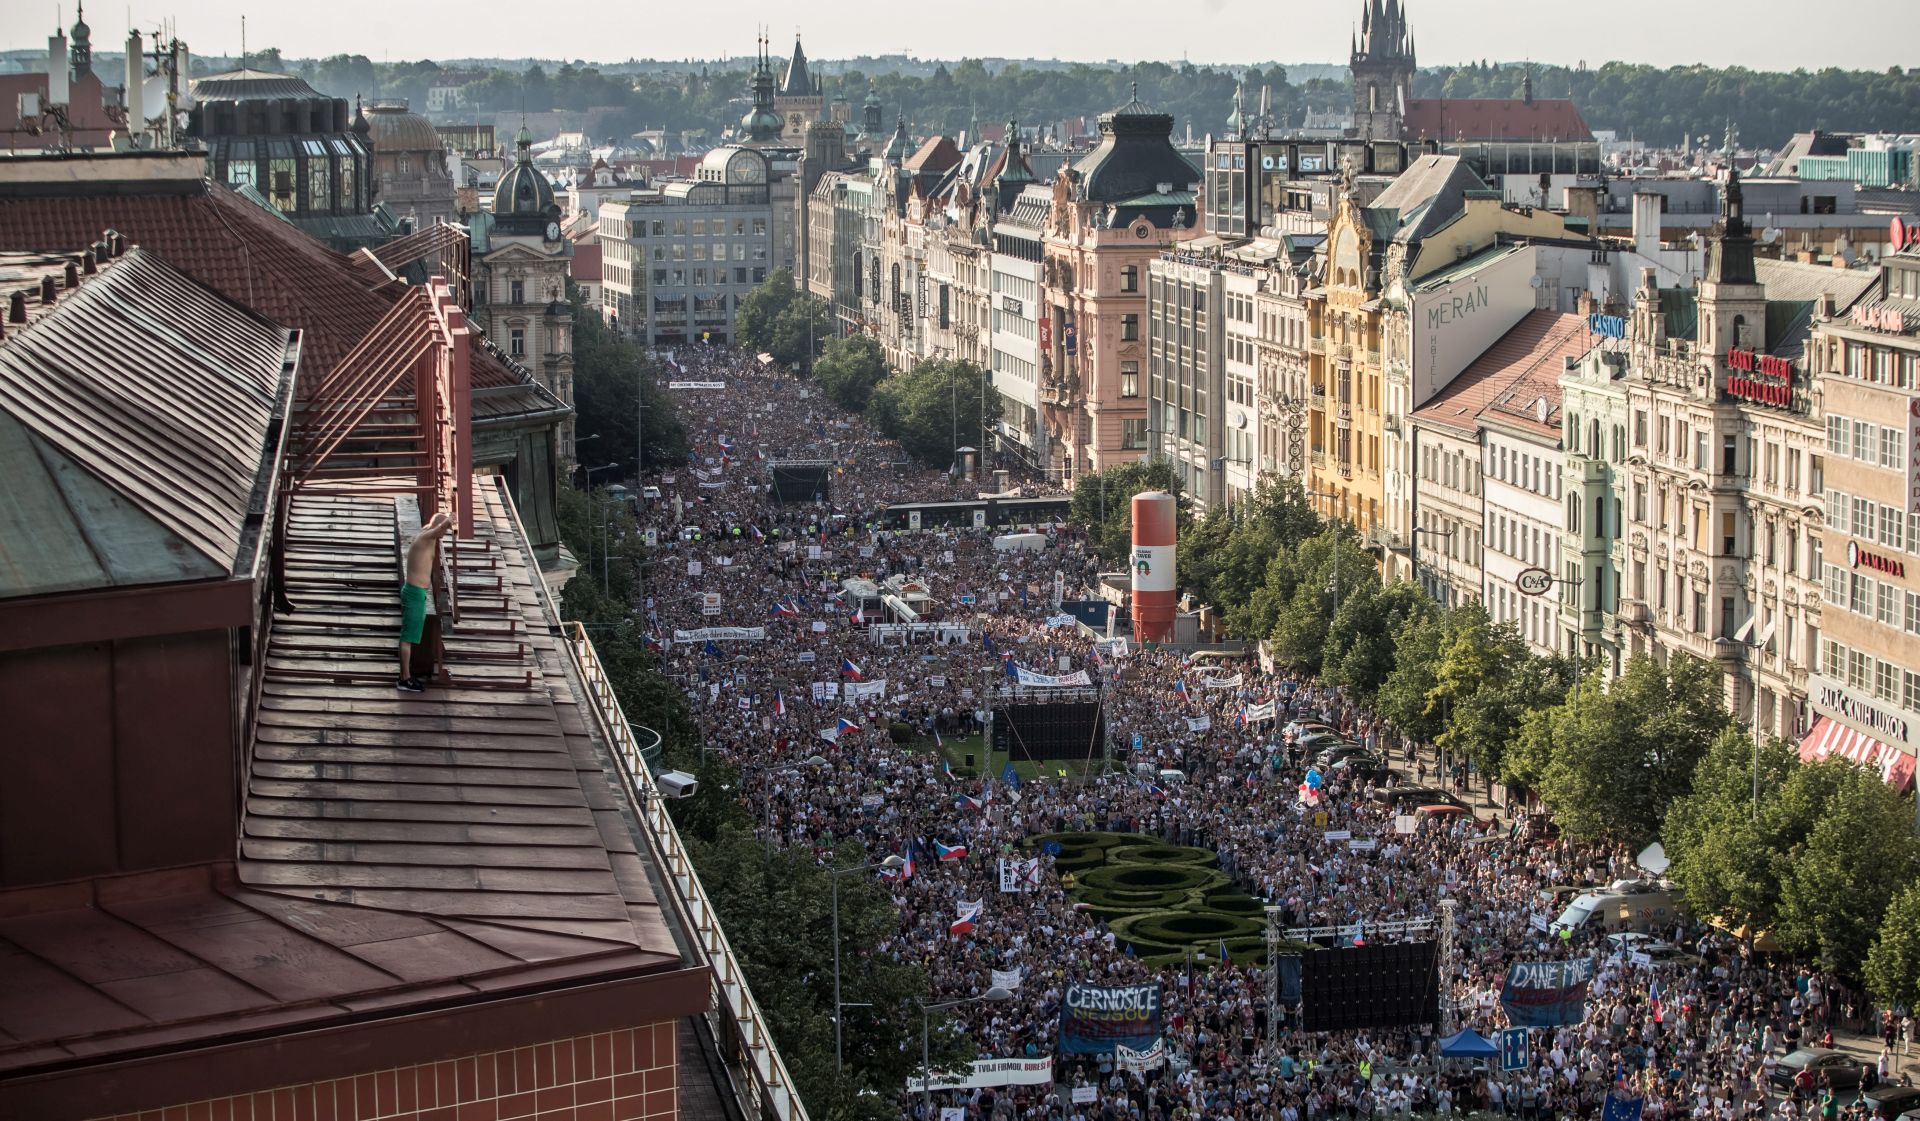 epa07625820 Thousands of demonstrators gather to protest against Czech Prime Minister Andrej Babis and new Minister of Justice at the Wenceslas Square in Prague, Czech Republic, 04 June 2019. Babis is suspected of alleged misuse of EU subsidies in a total of 50 million Czech crowns (1.9 milion euro) which were invested into the Capi hnizdo (Stork's Nest) farm in Central Bohemia. The EU's fraud office OLAF is investigating the case. In additional, last week Czech media reported, the European Commission sent an audit to the Czech authorities that Czech Prime Minister Andrej Babis is in a conflict of interests due to continuing ties with his businesses.  EPA/MARTIN DIVISEK